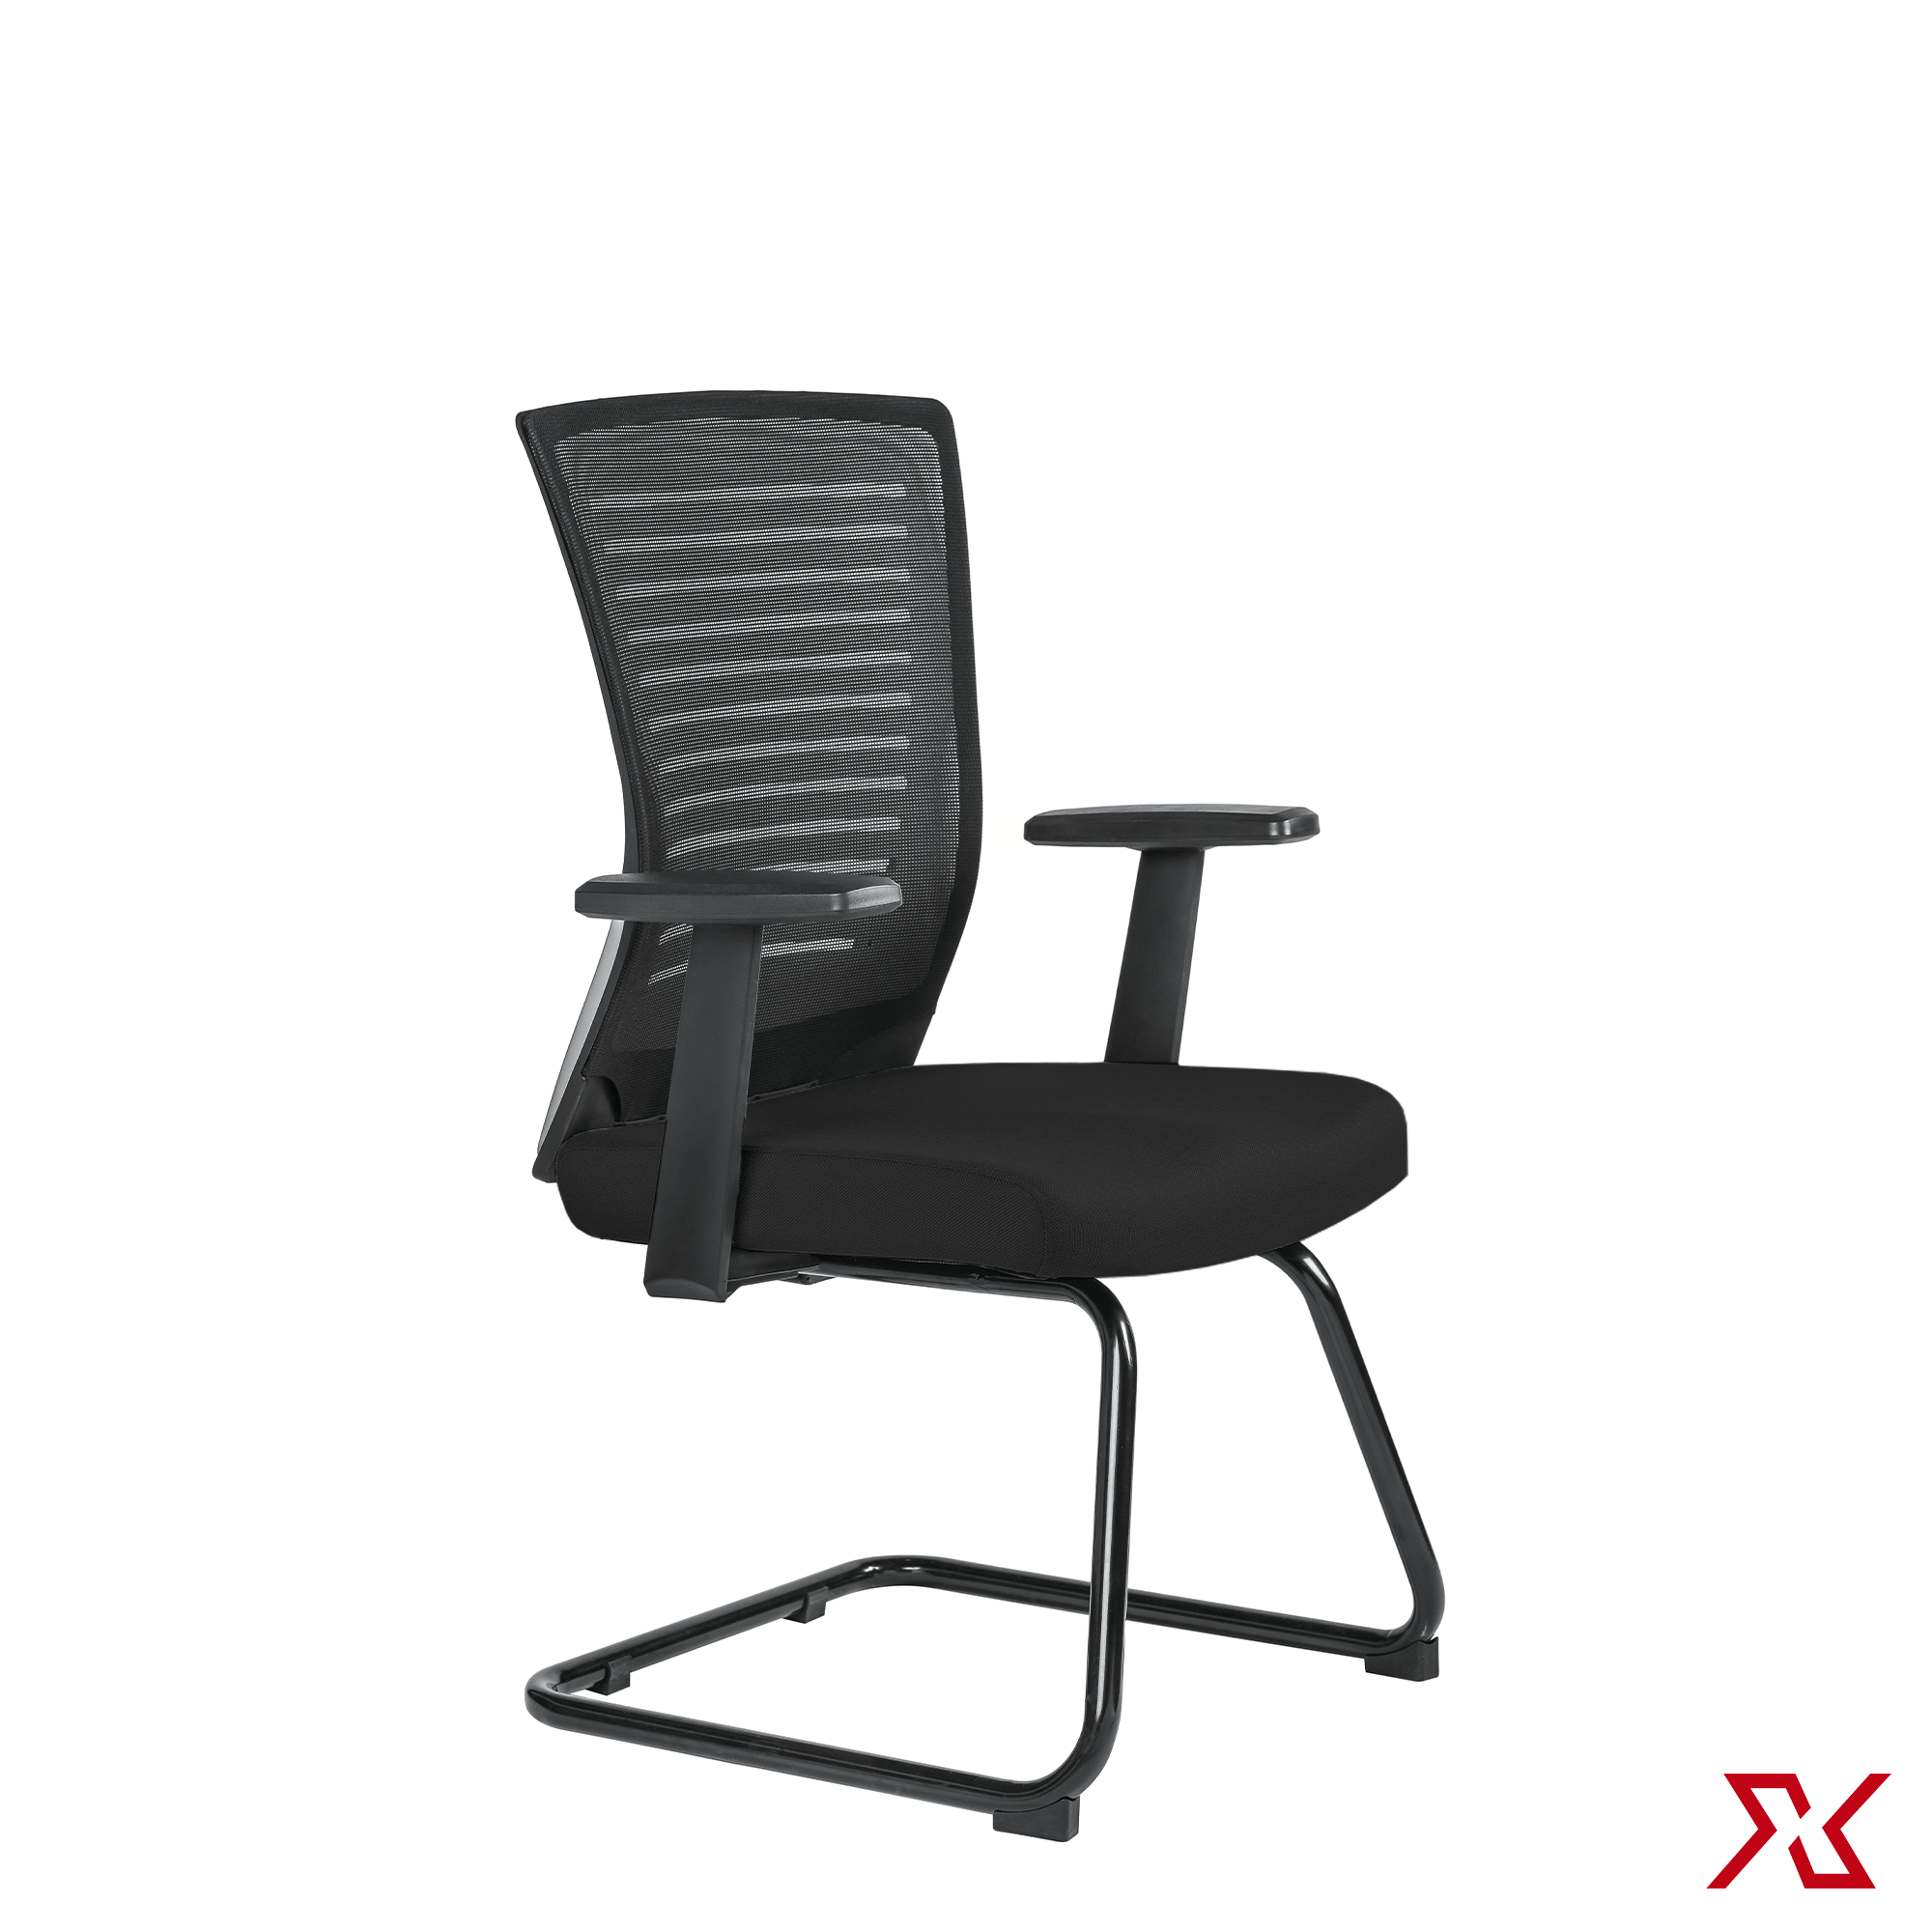 VINO Medium Back Visitor (Black Chair) - Exclusiff Seating Sytems